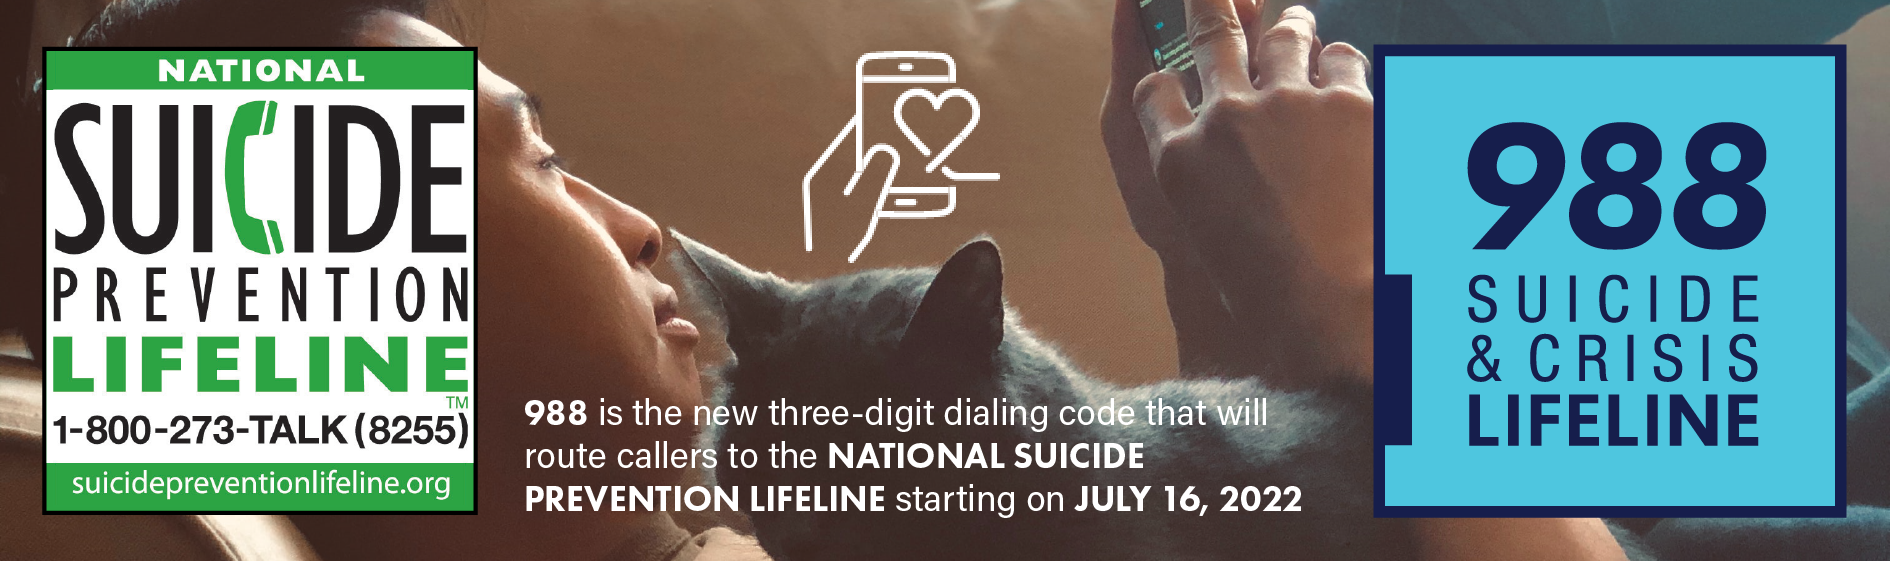 988 Suicide & Crisis Lifeline. Man on couch, cuddling with cat and looking at cell phone.